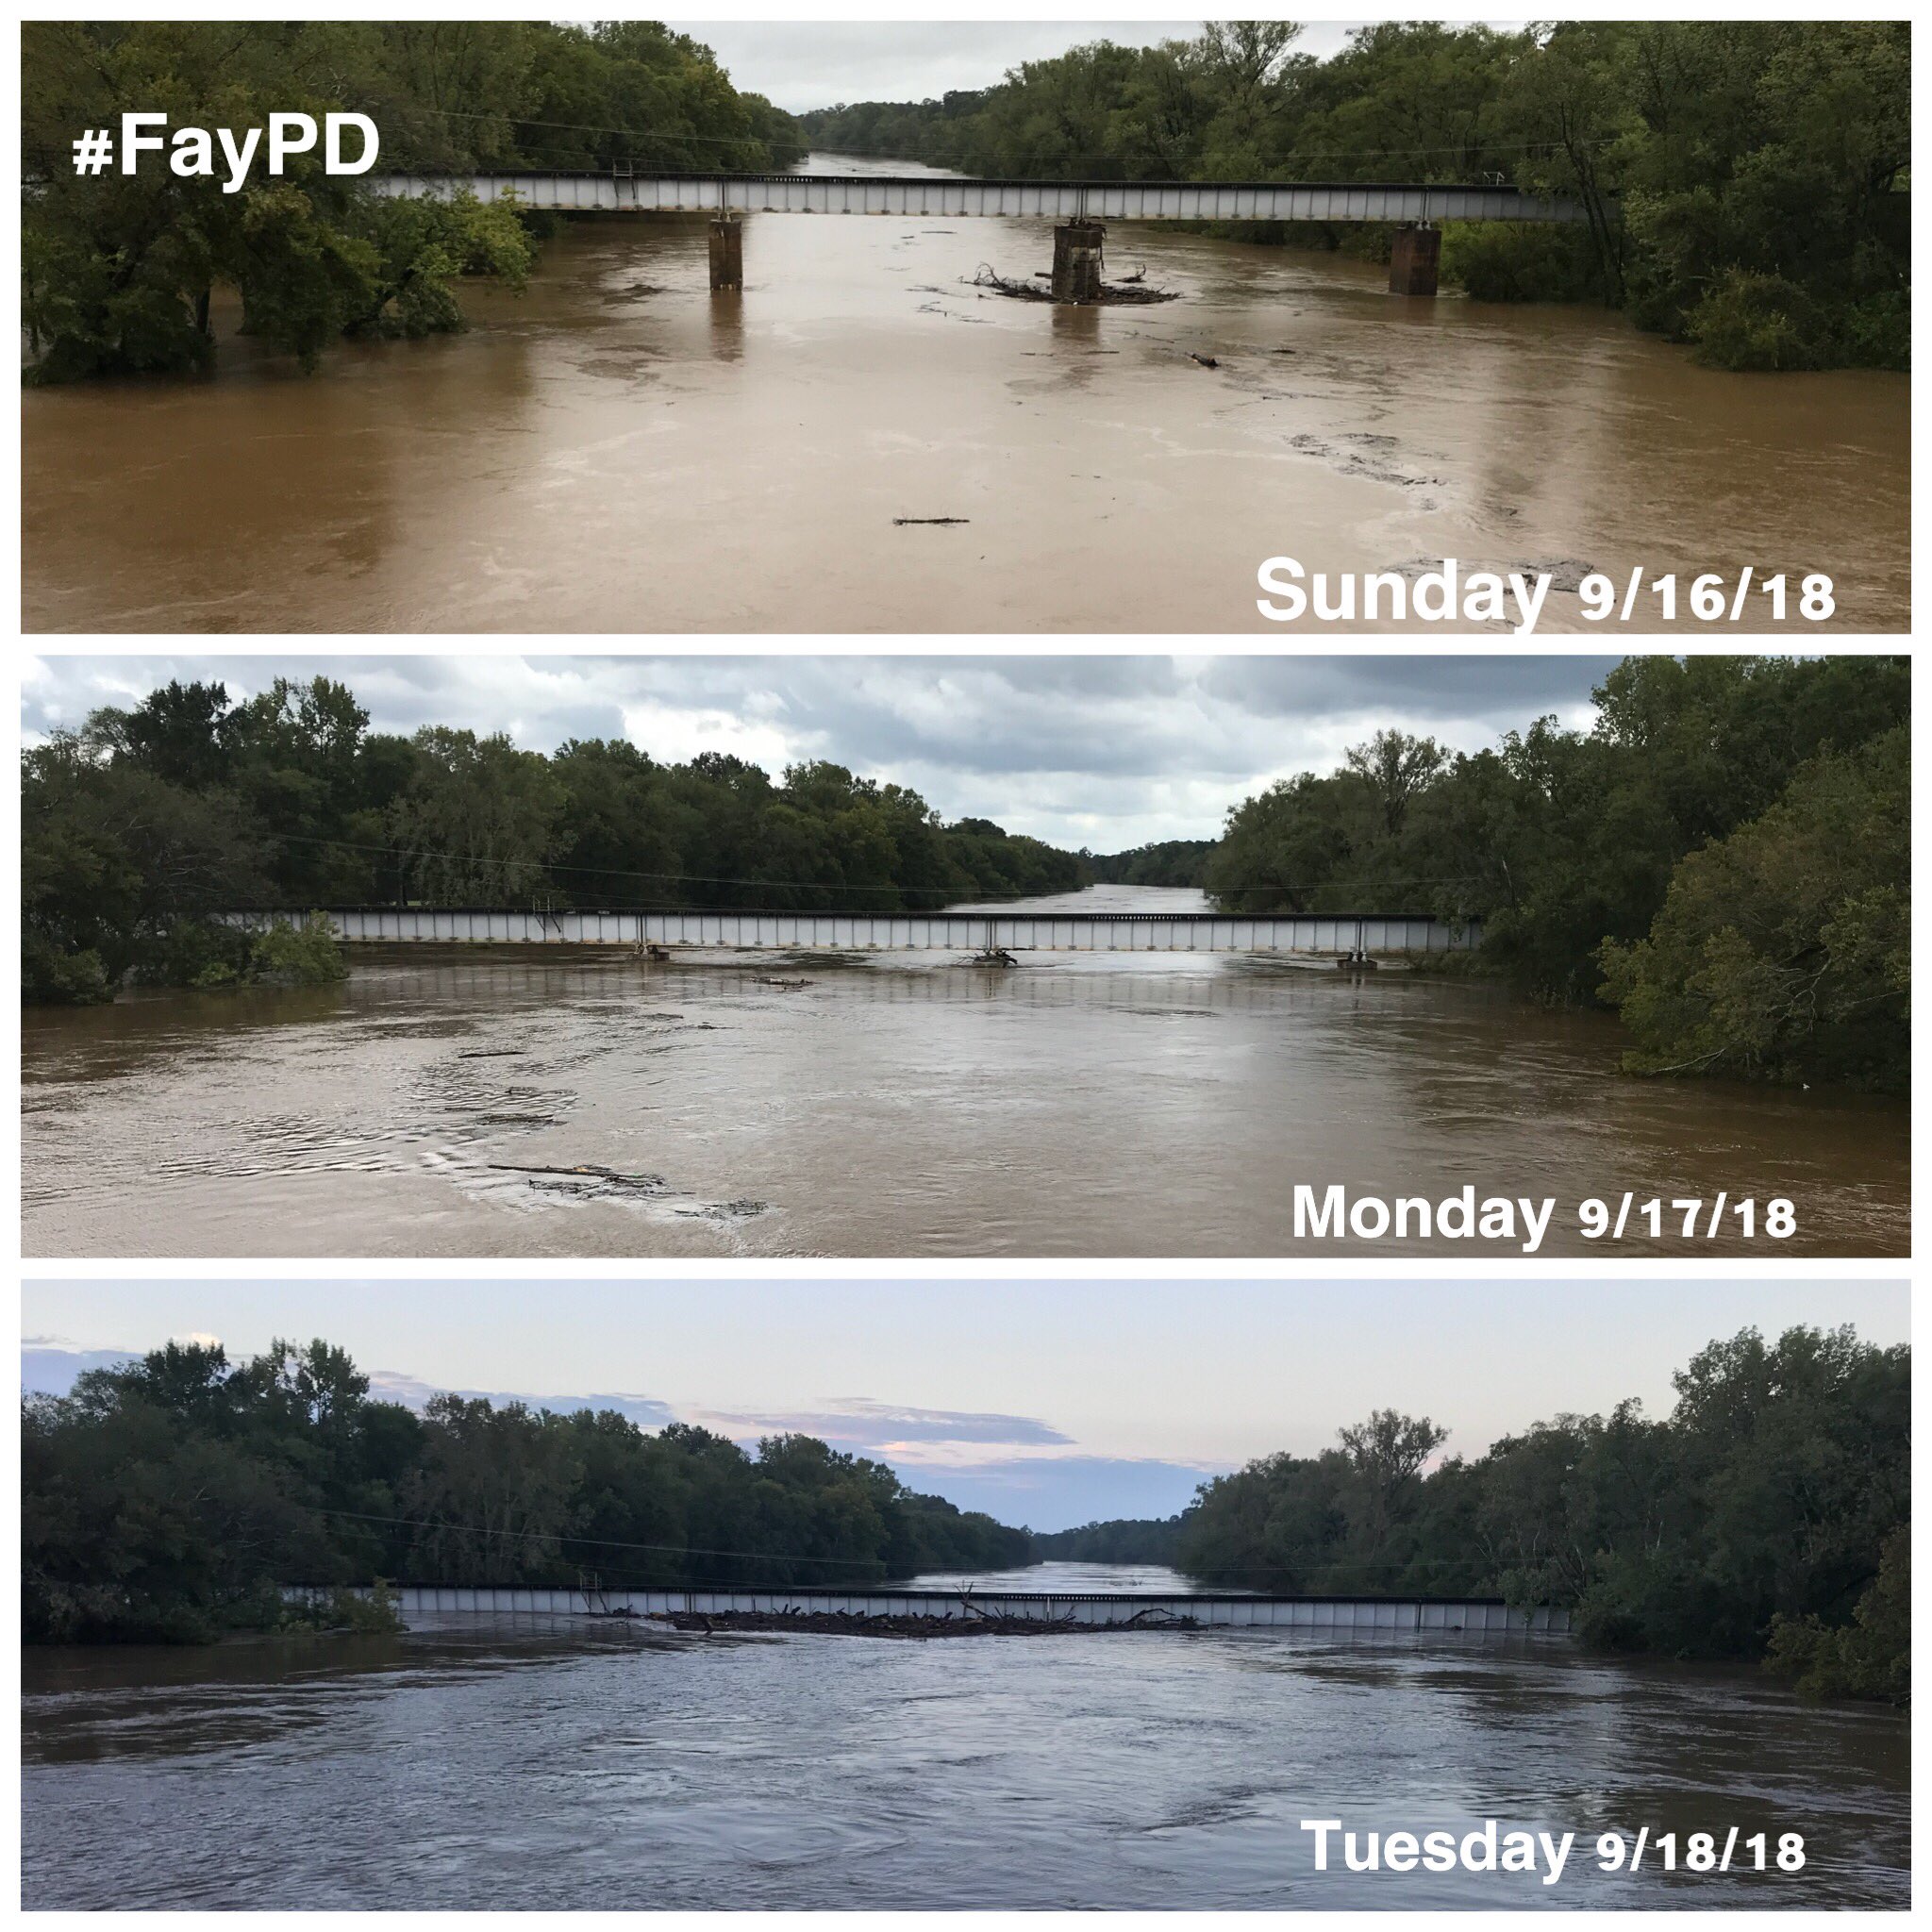 Cape Fear River in Fayetteville, N.C. (Photo Courtesy Fayetteville Police Department.)